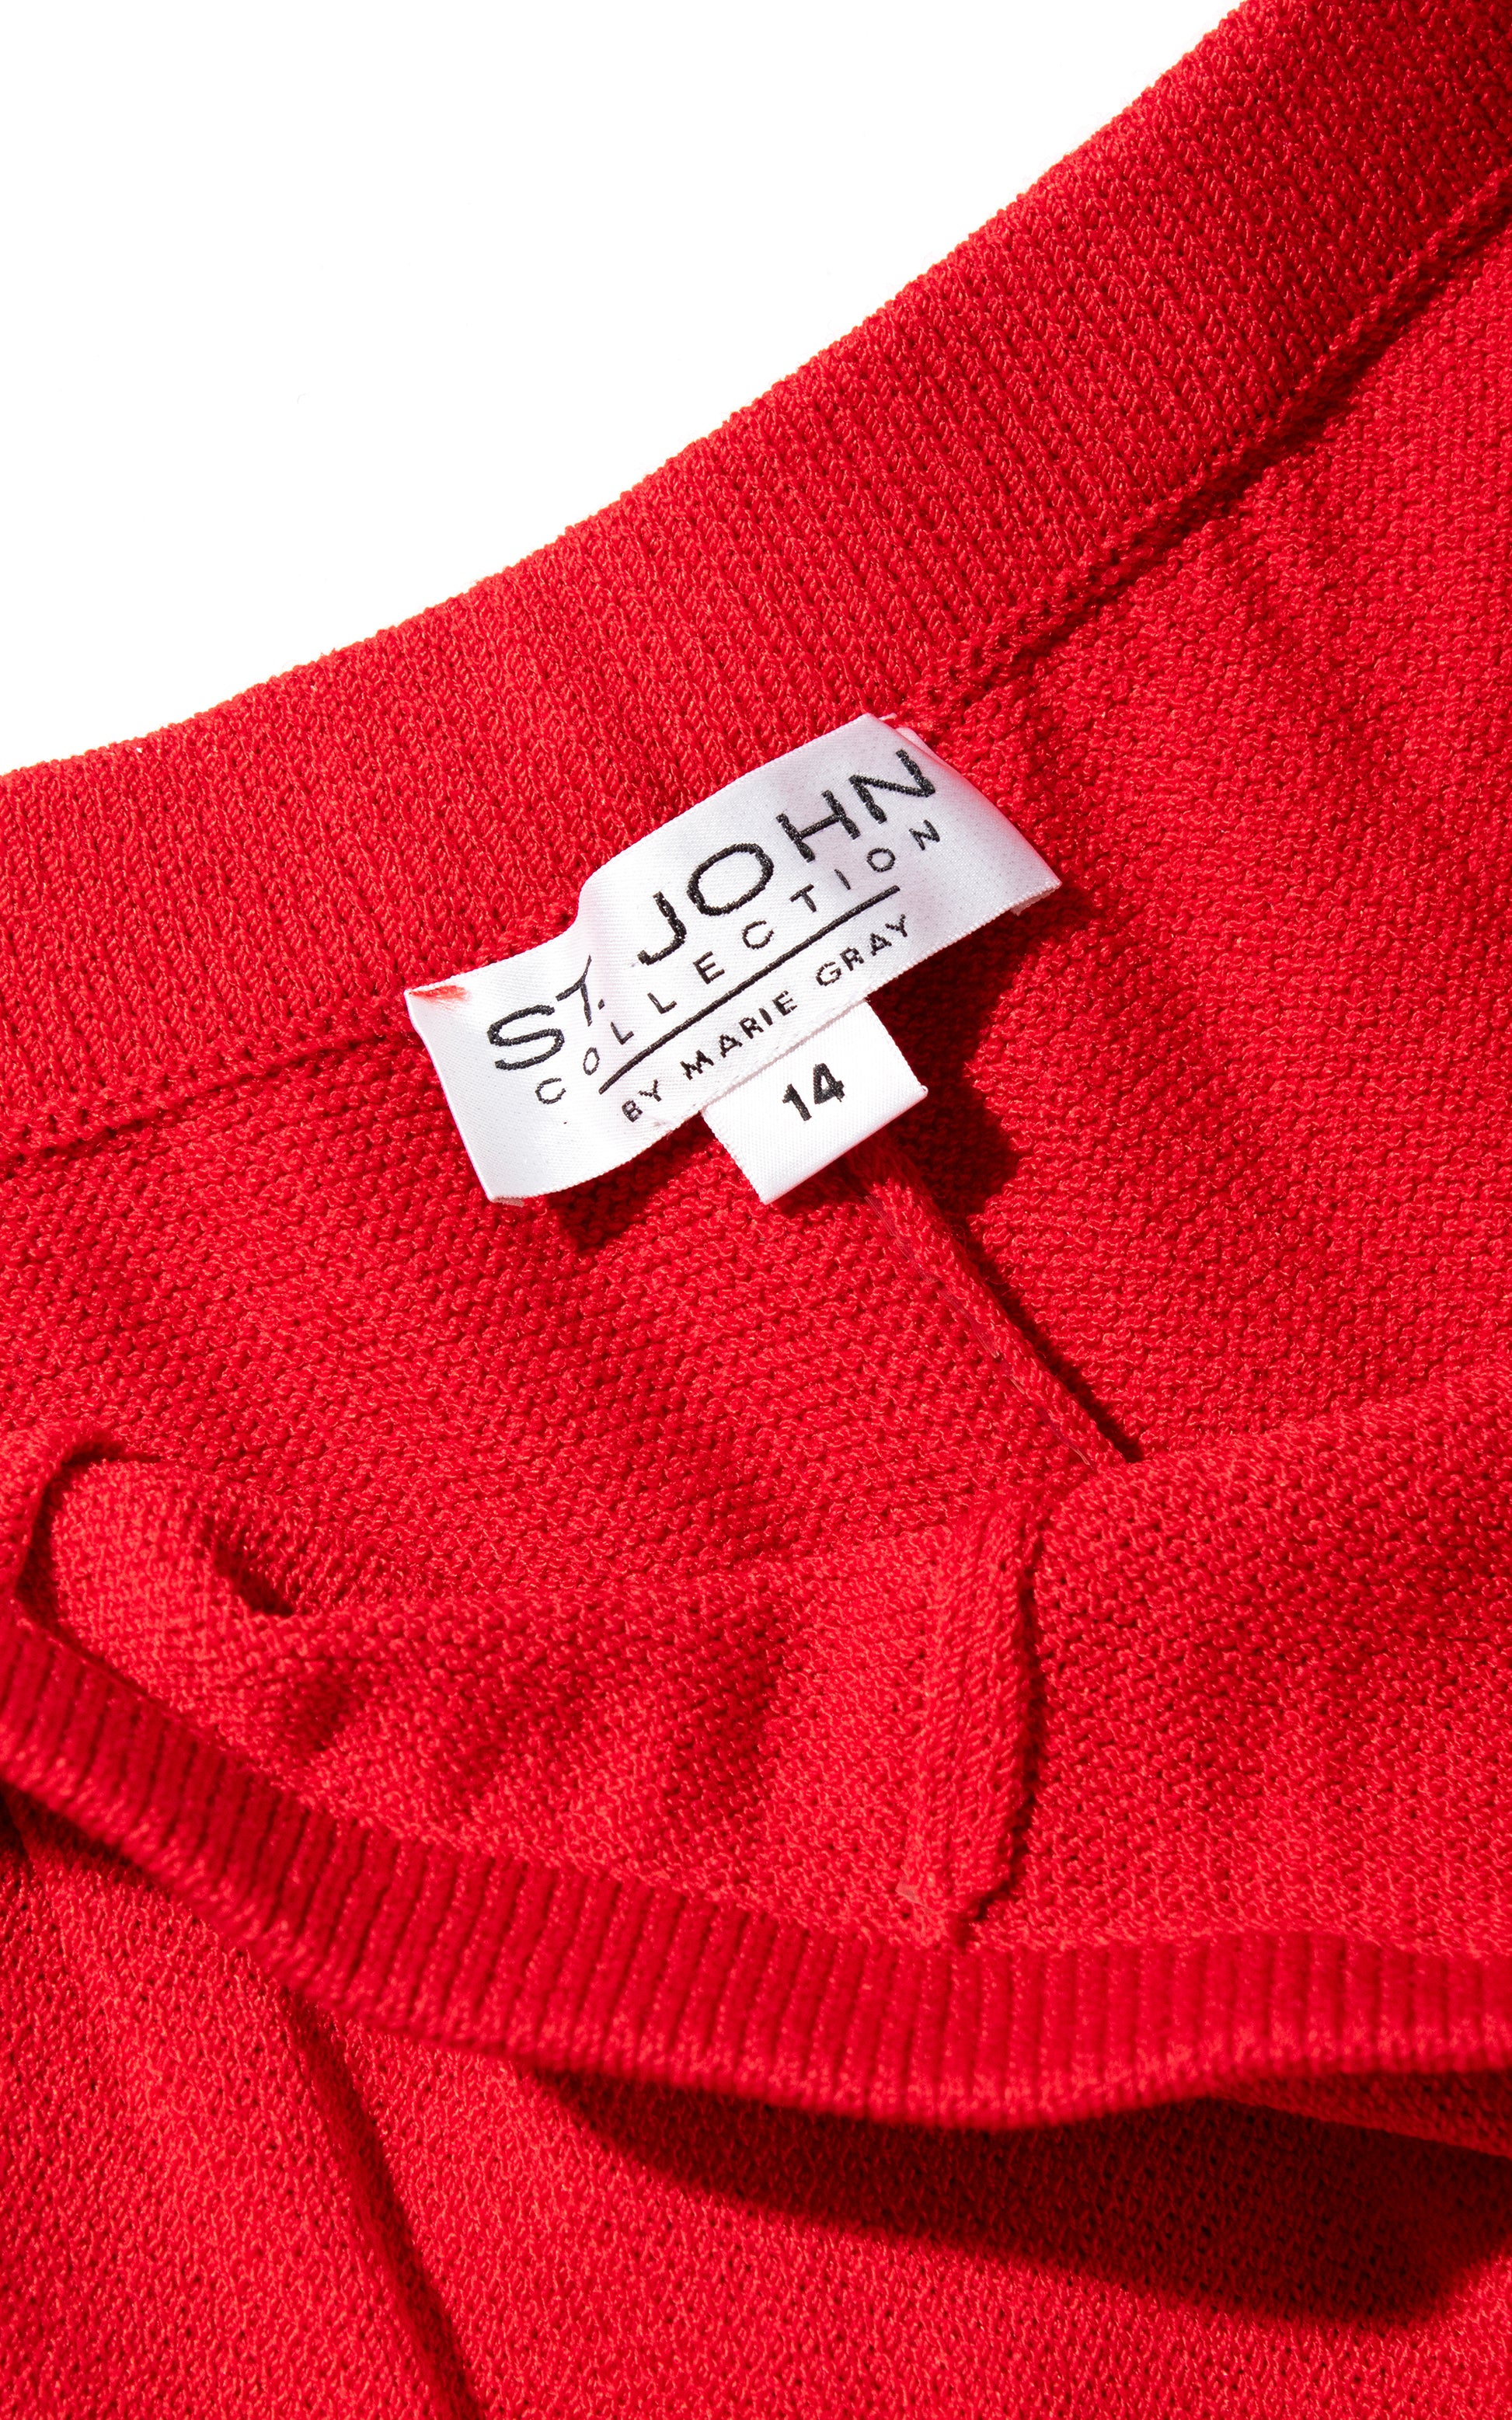 Vintage 80s 1980s ST. JOHN Red Knit Wool Pants High Waisted Trousers BirthdayLifeVintage